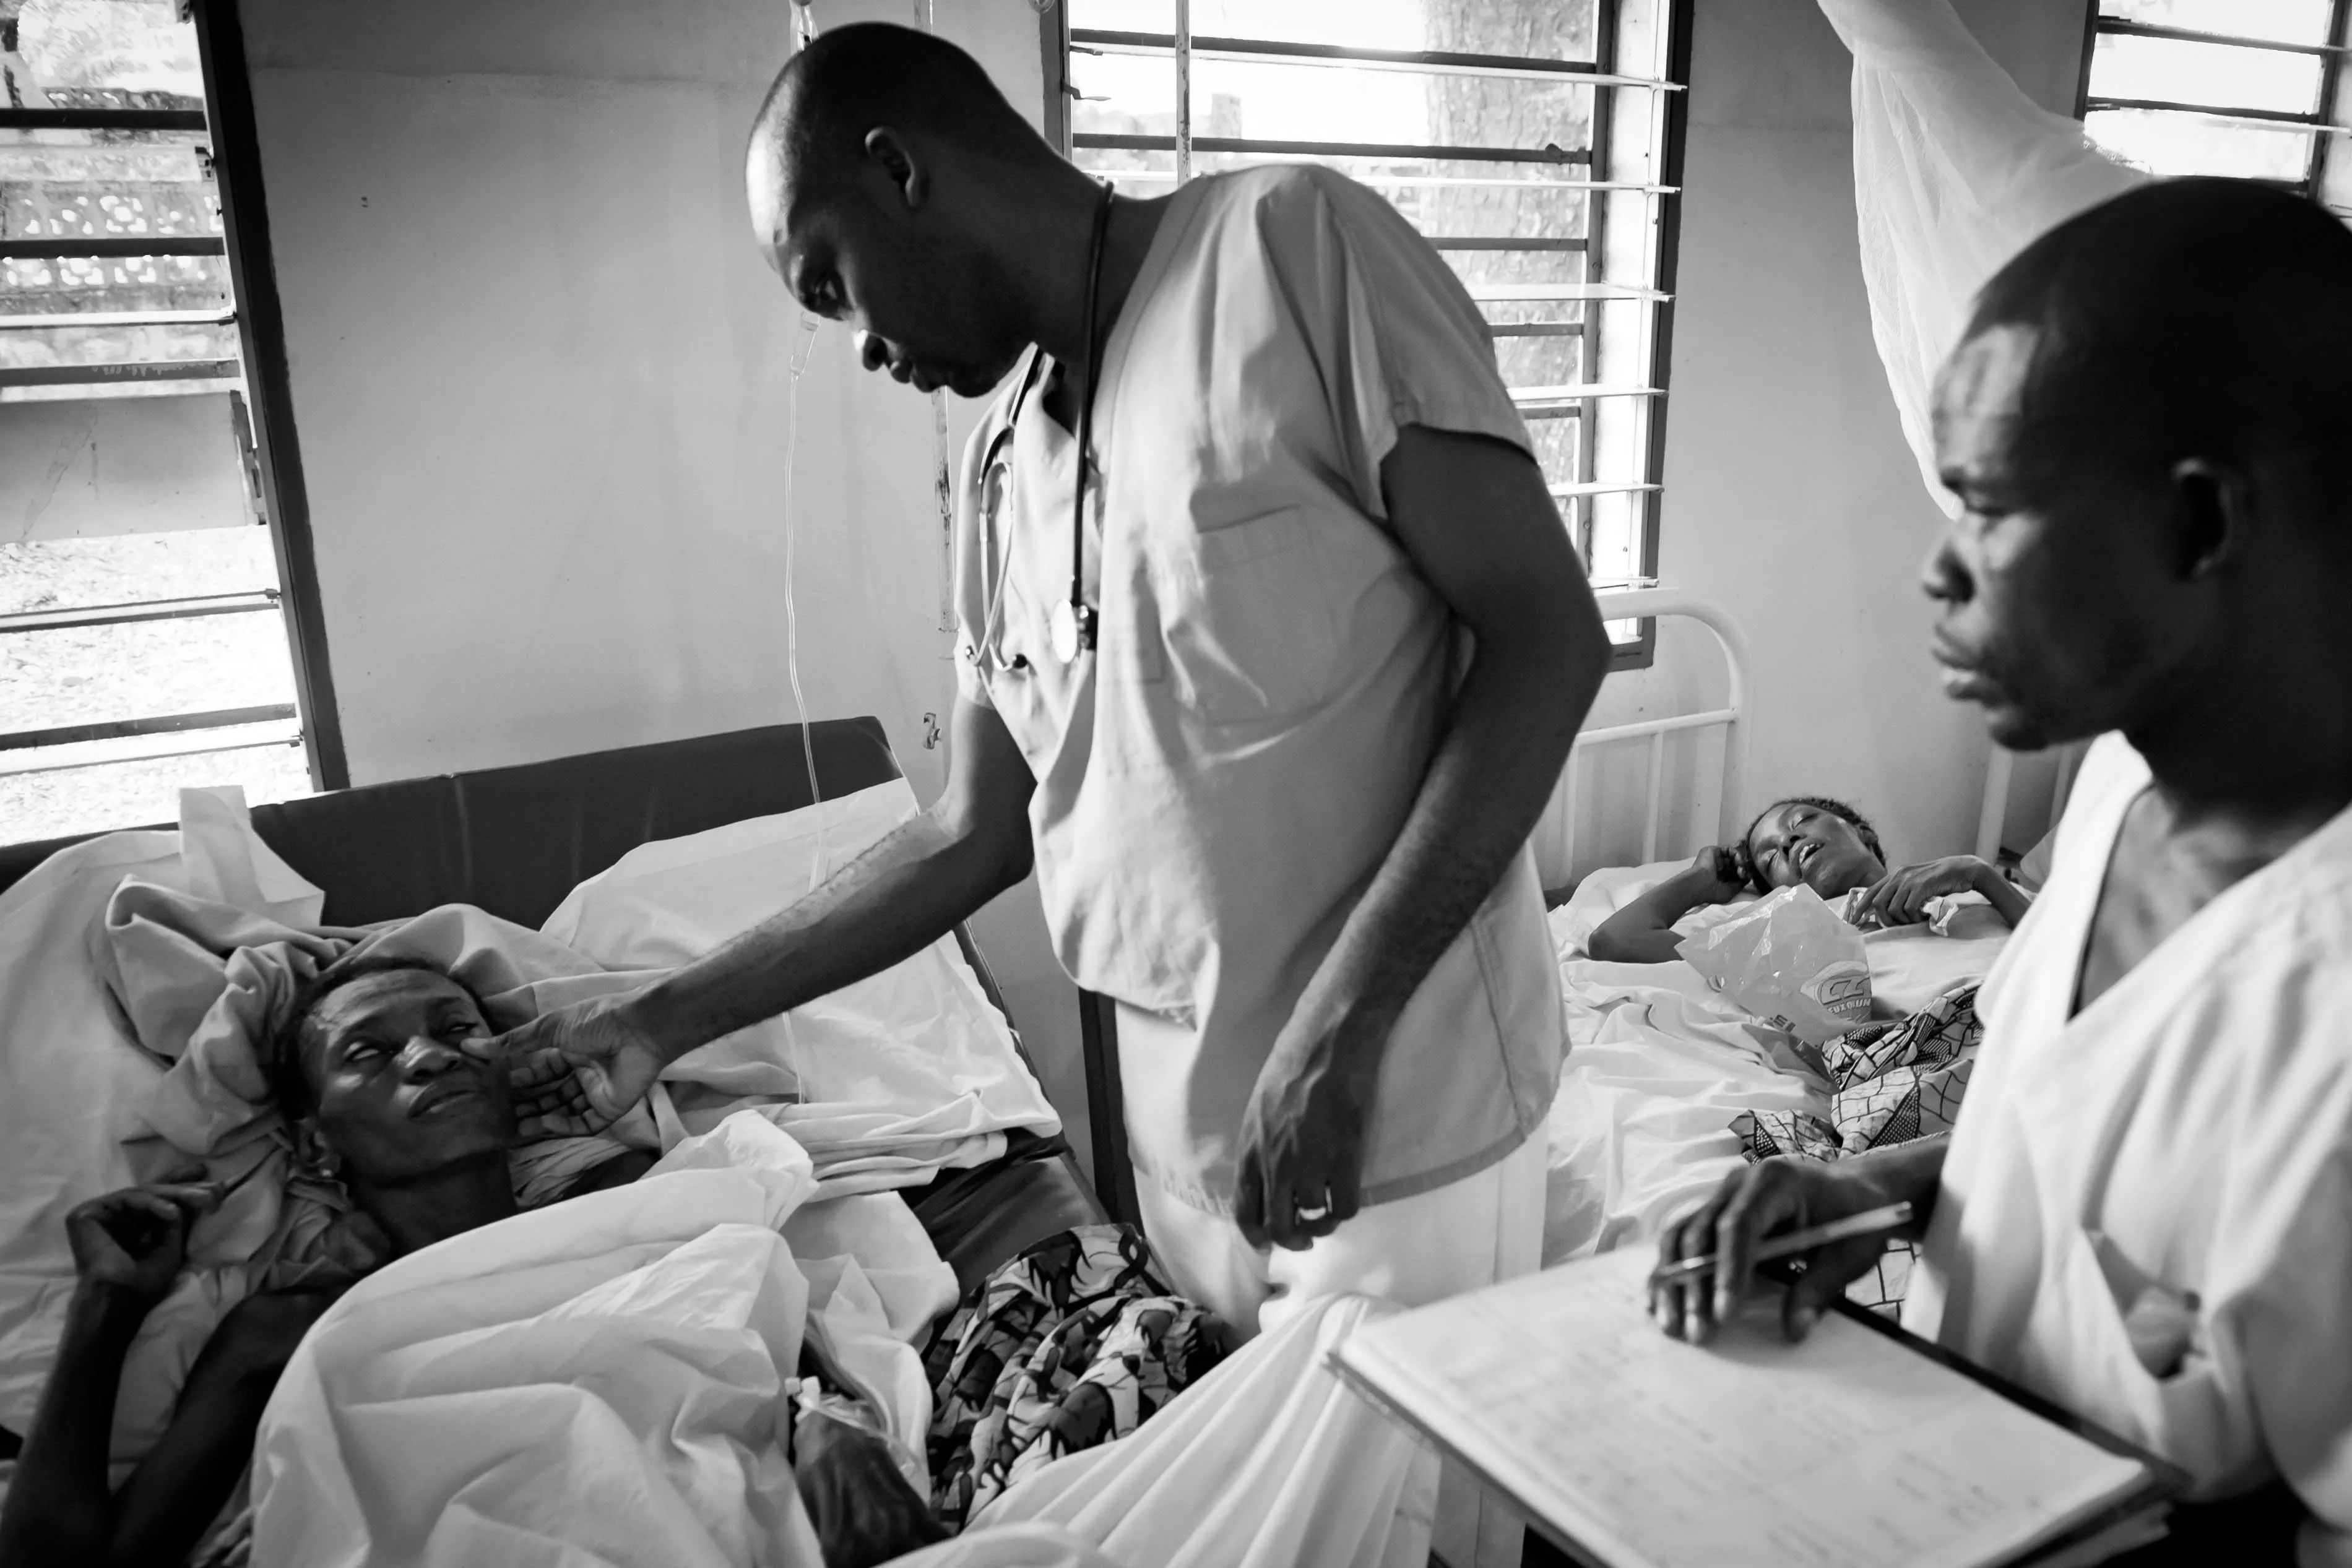 At the Centre Hospitalier de Kabinda (CHK) in Kinshasa, MSF has observed an excessively high number of patients arriving with serious complications resulting from lack of treatment.